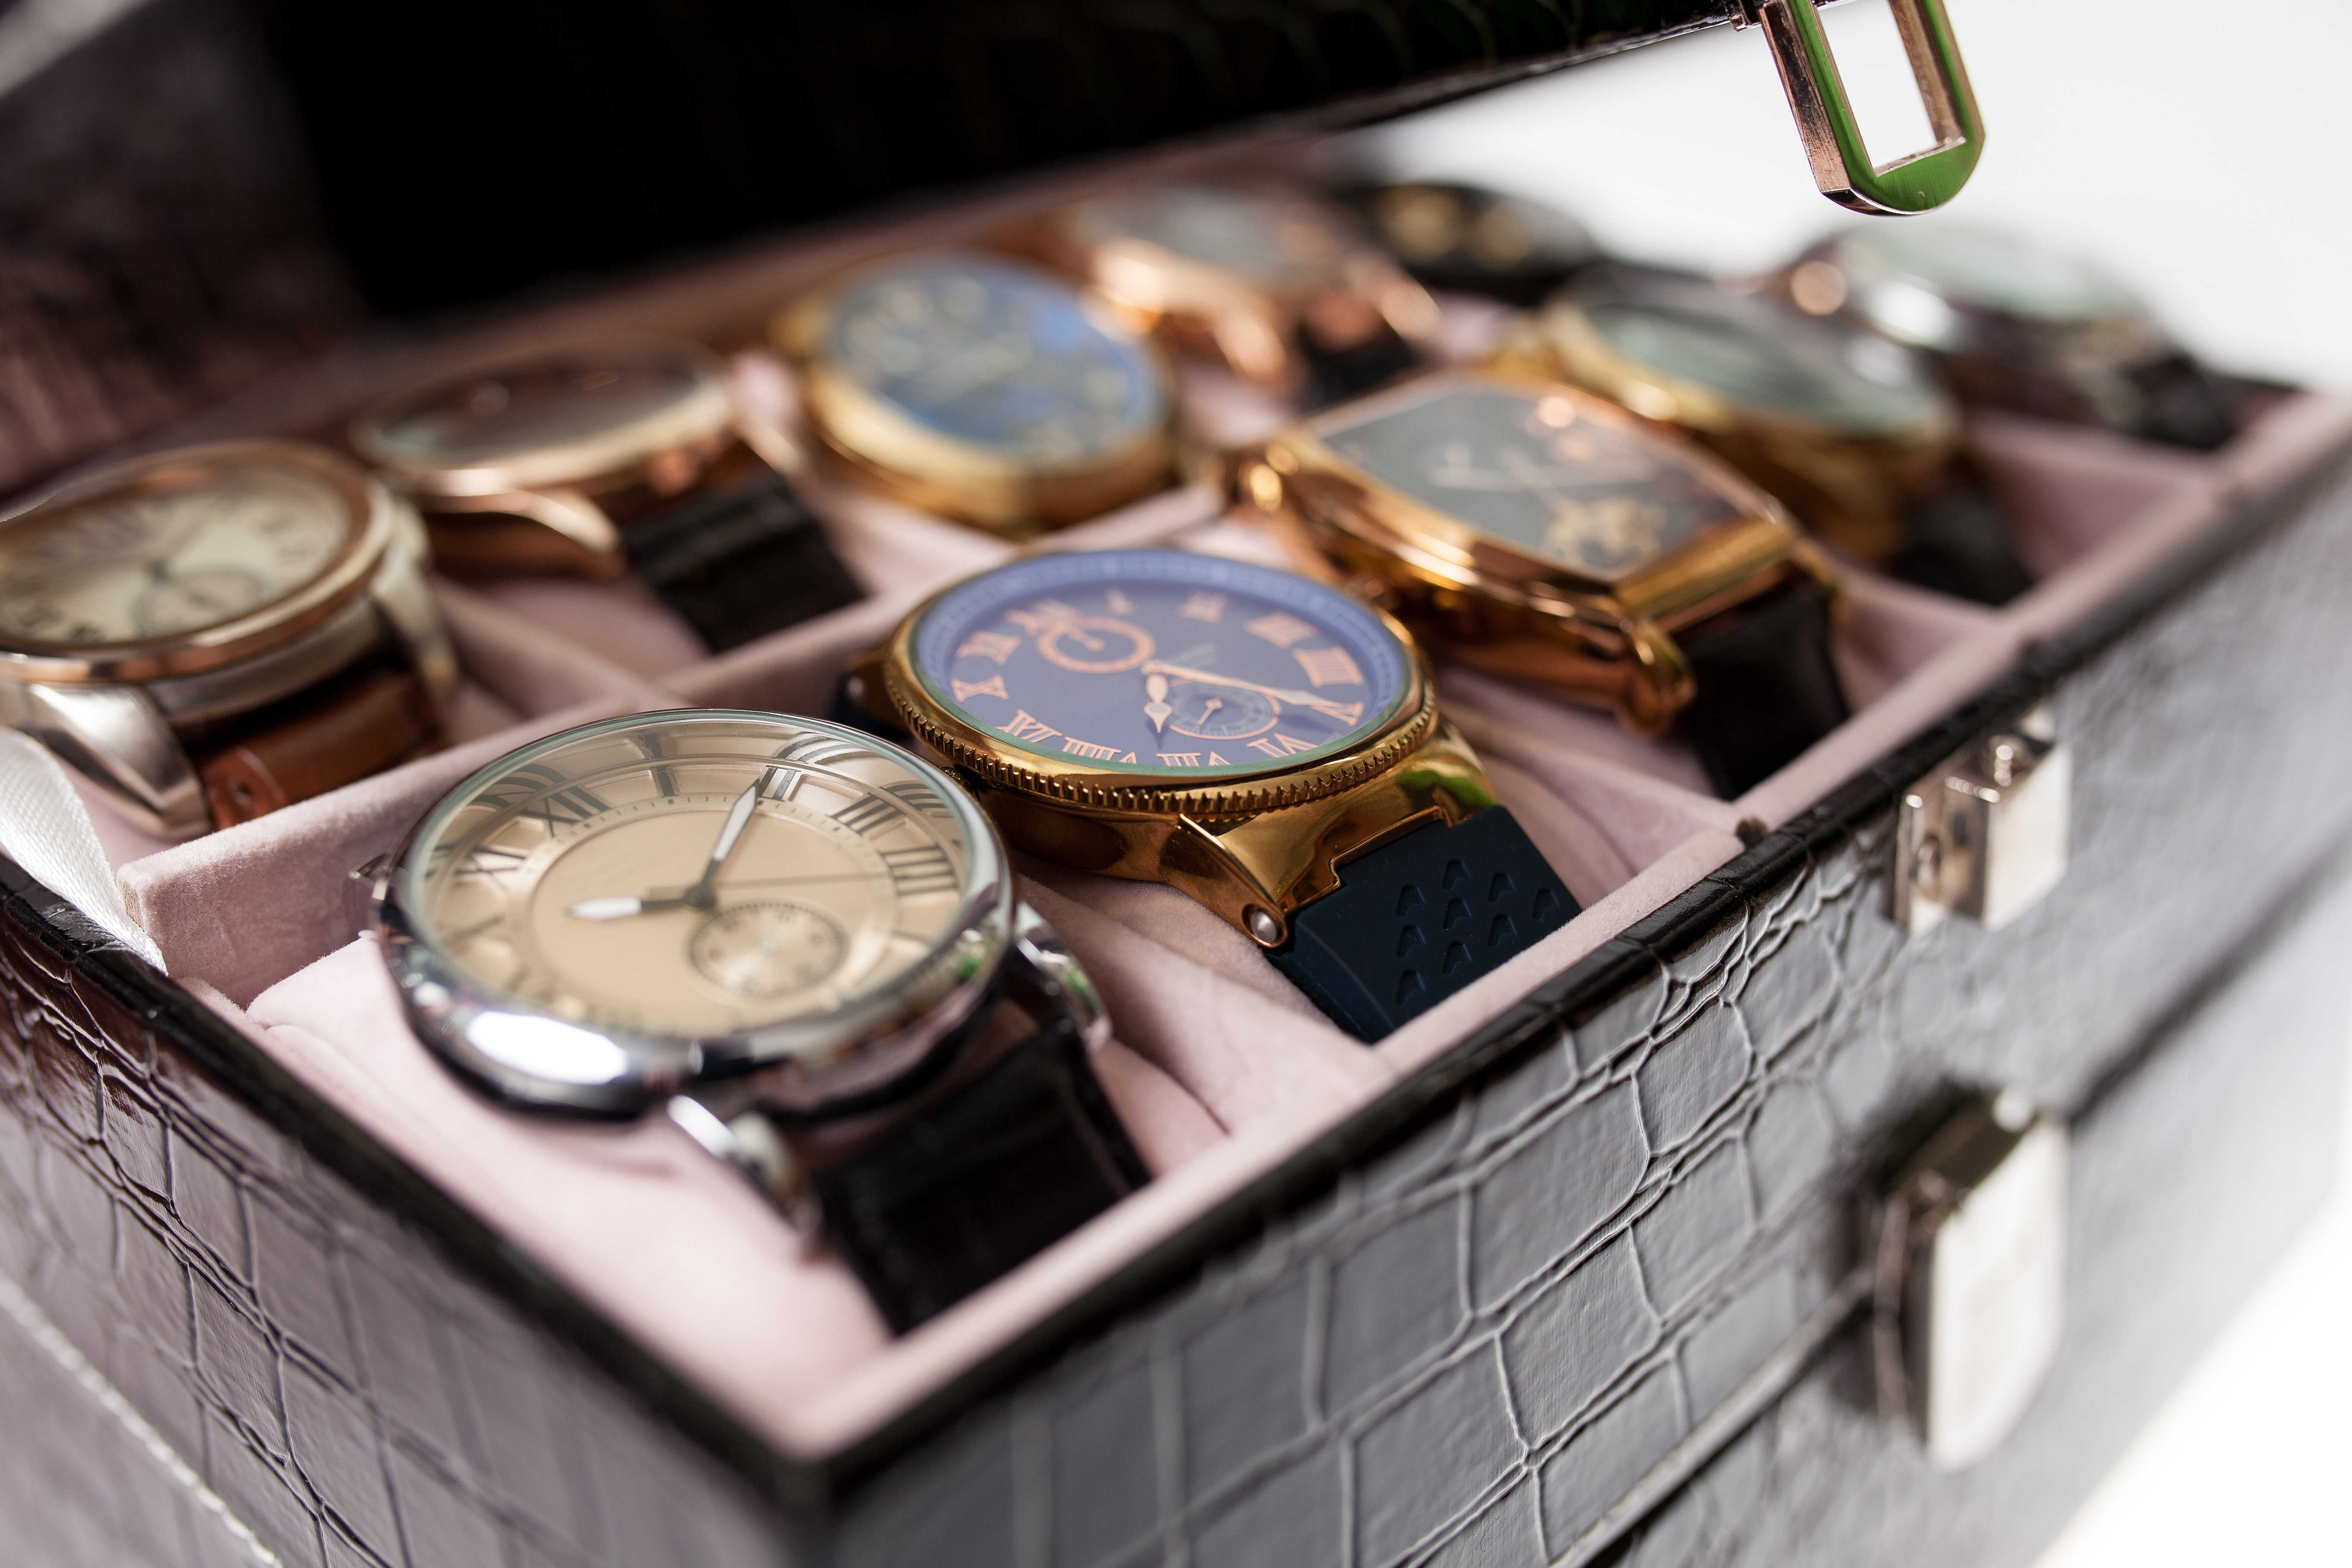 The Best Watch Case, Safe, and Essential Tools, According to Experts